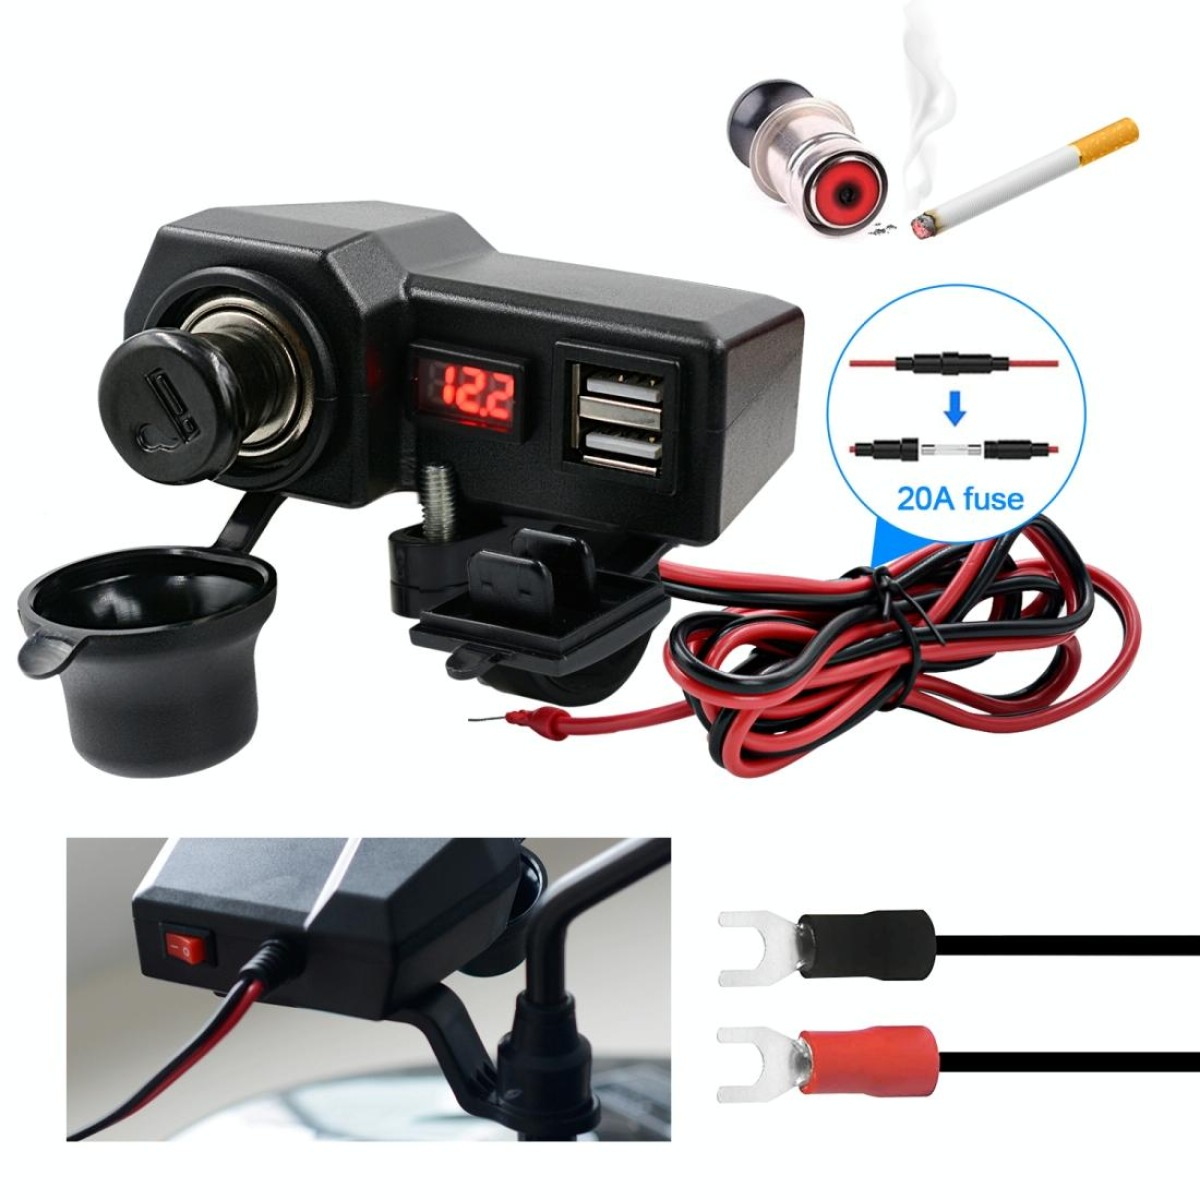 CS-1072B1 Motorcycle Dual USB Charger + Voltmeter with Cigarette Lighter & Cigarette Butts (Black)